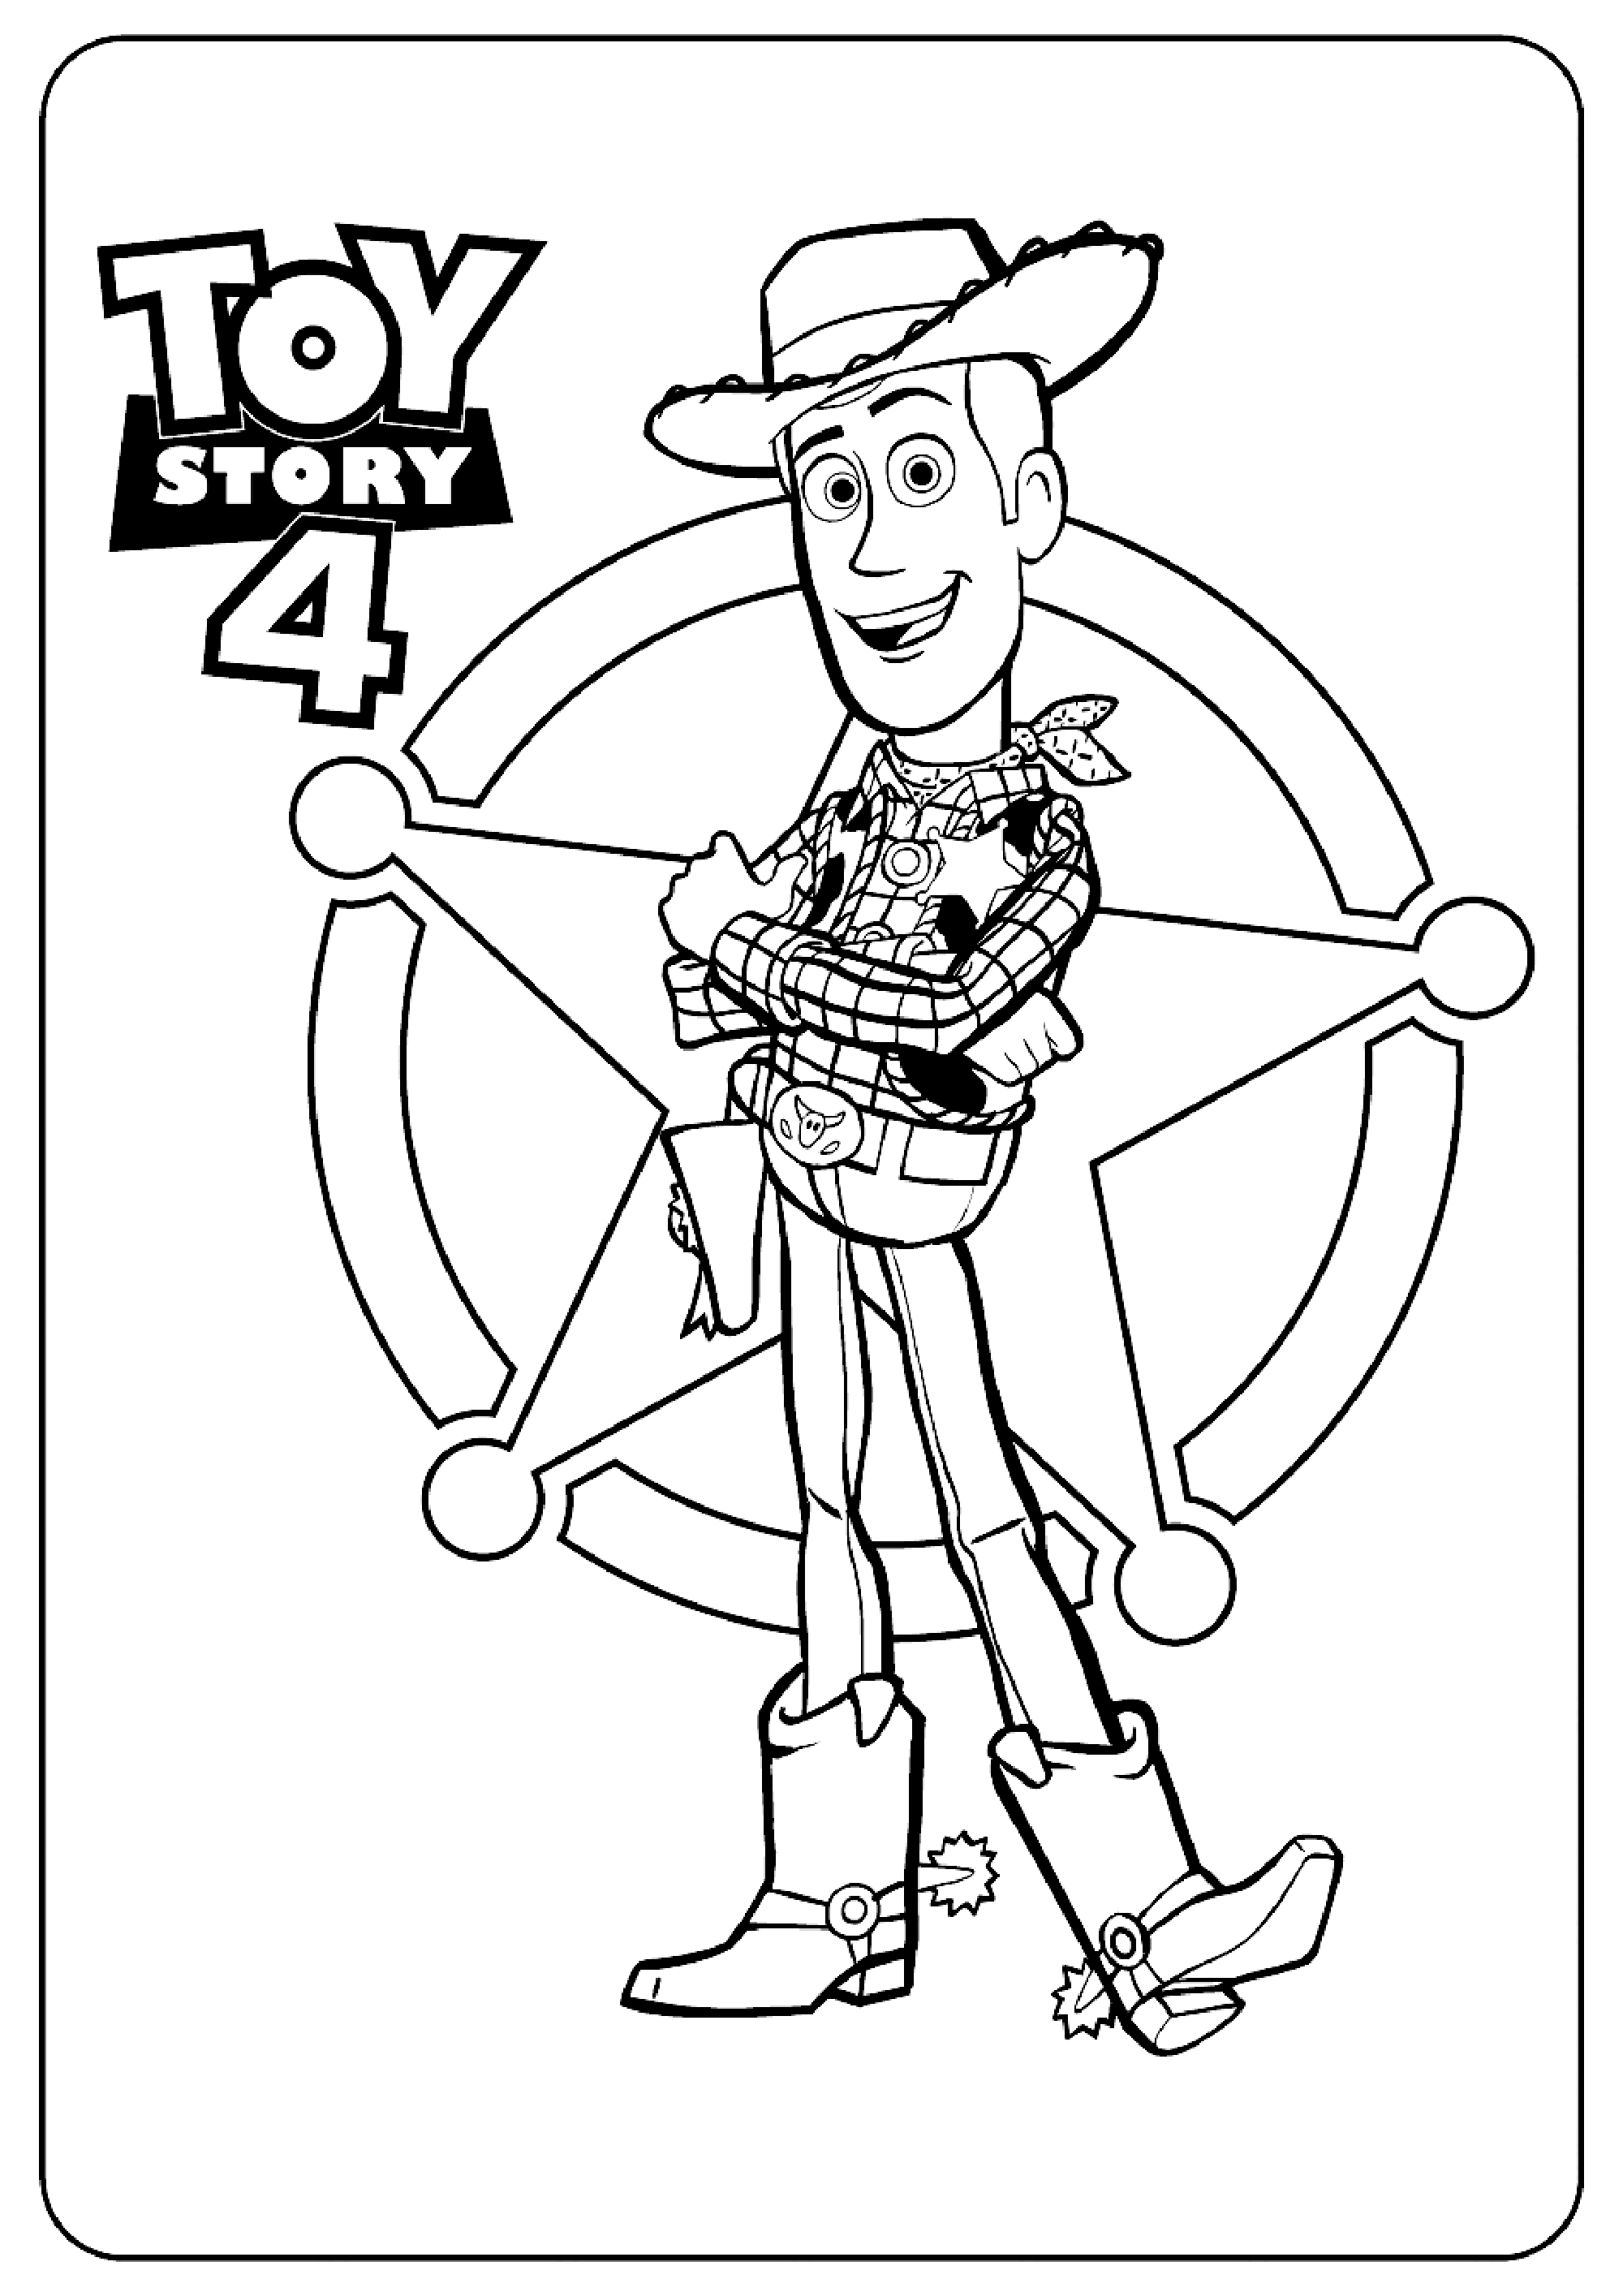 toy-story-printable-coloring-pages